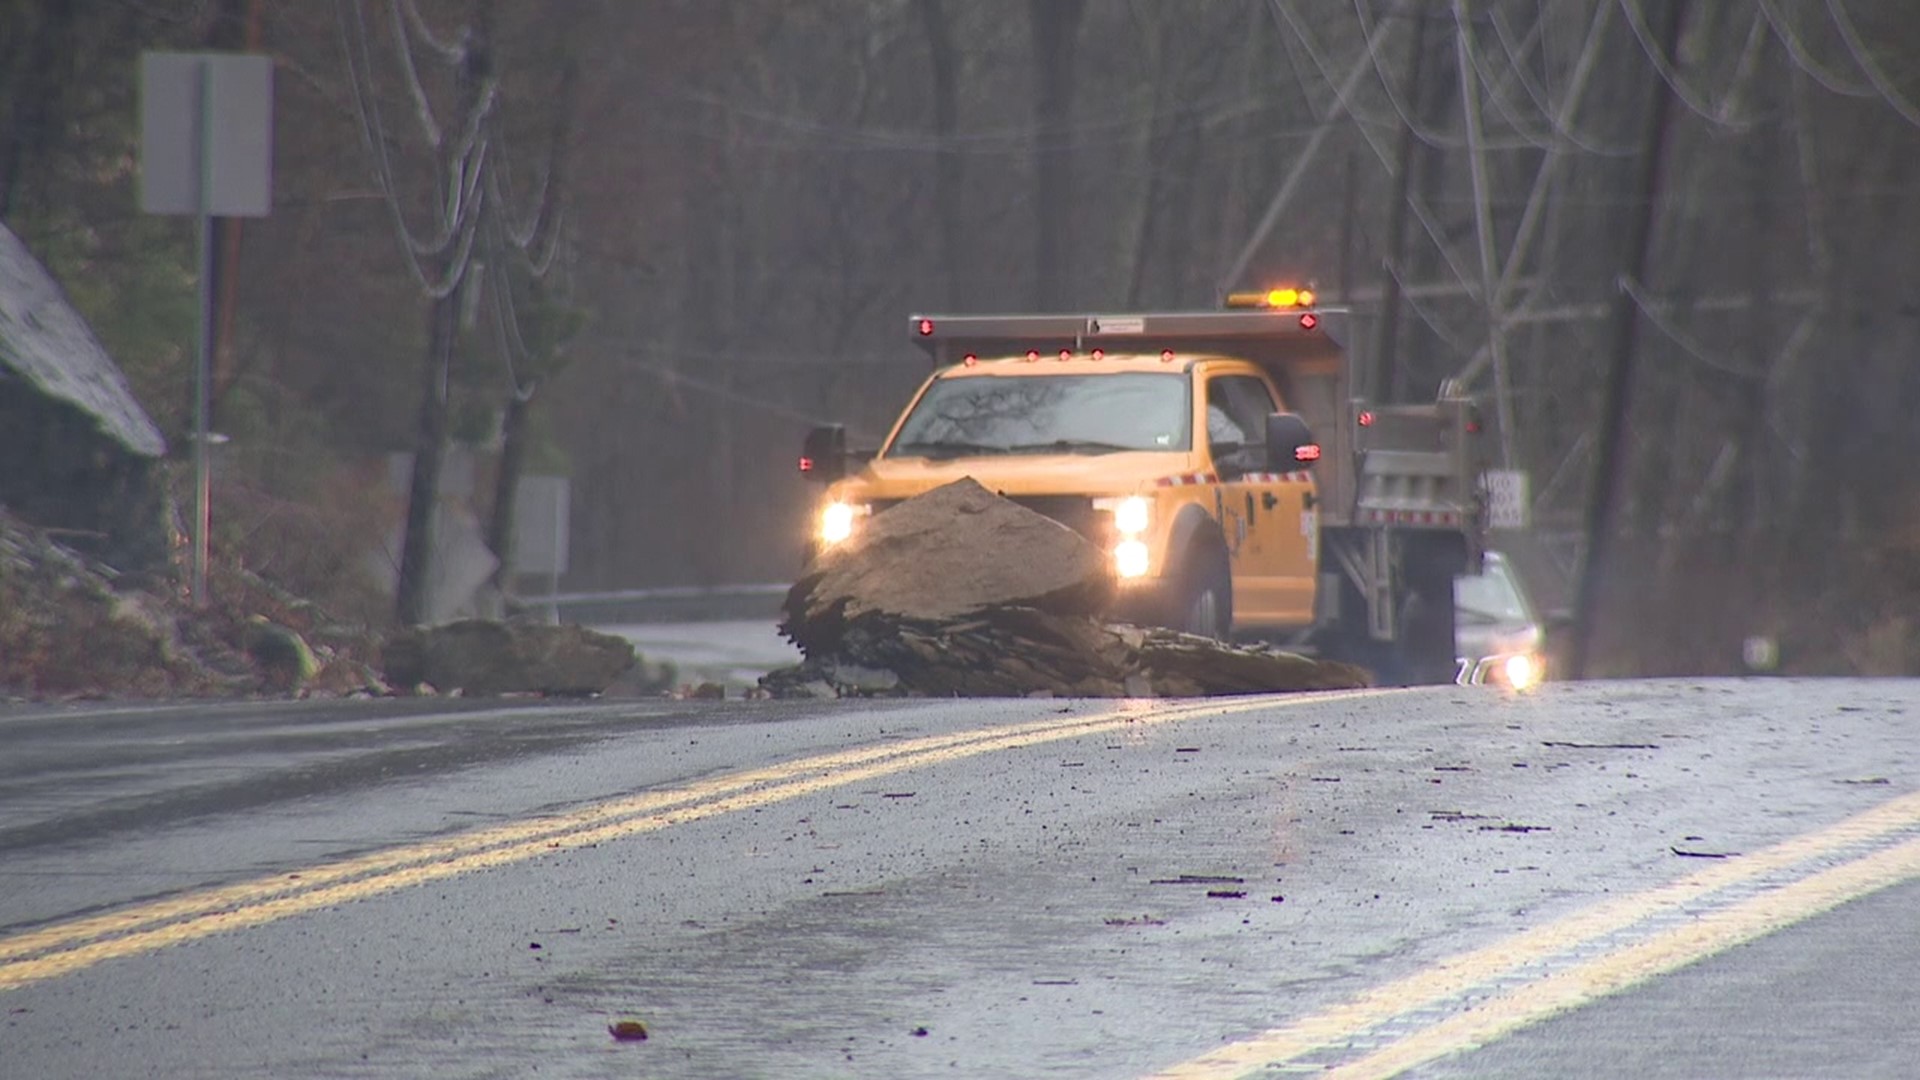 A large rock fell into the northbound lane of Route 611 between Stroudsburg and the Delaware Water Gap.